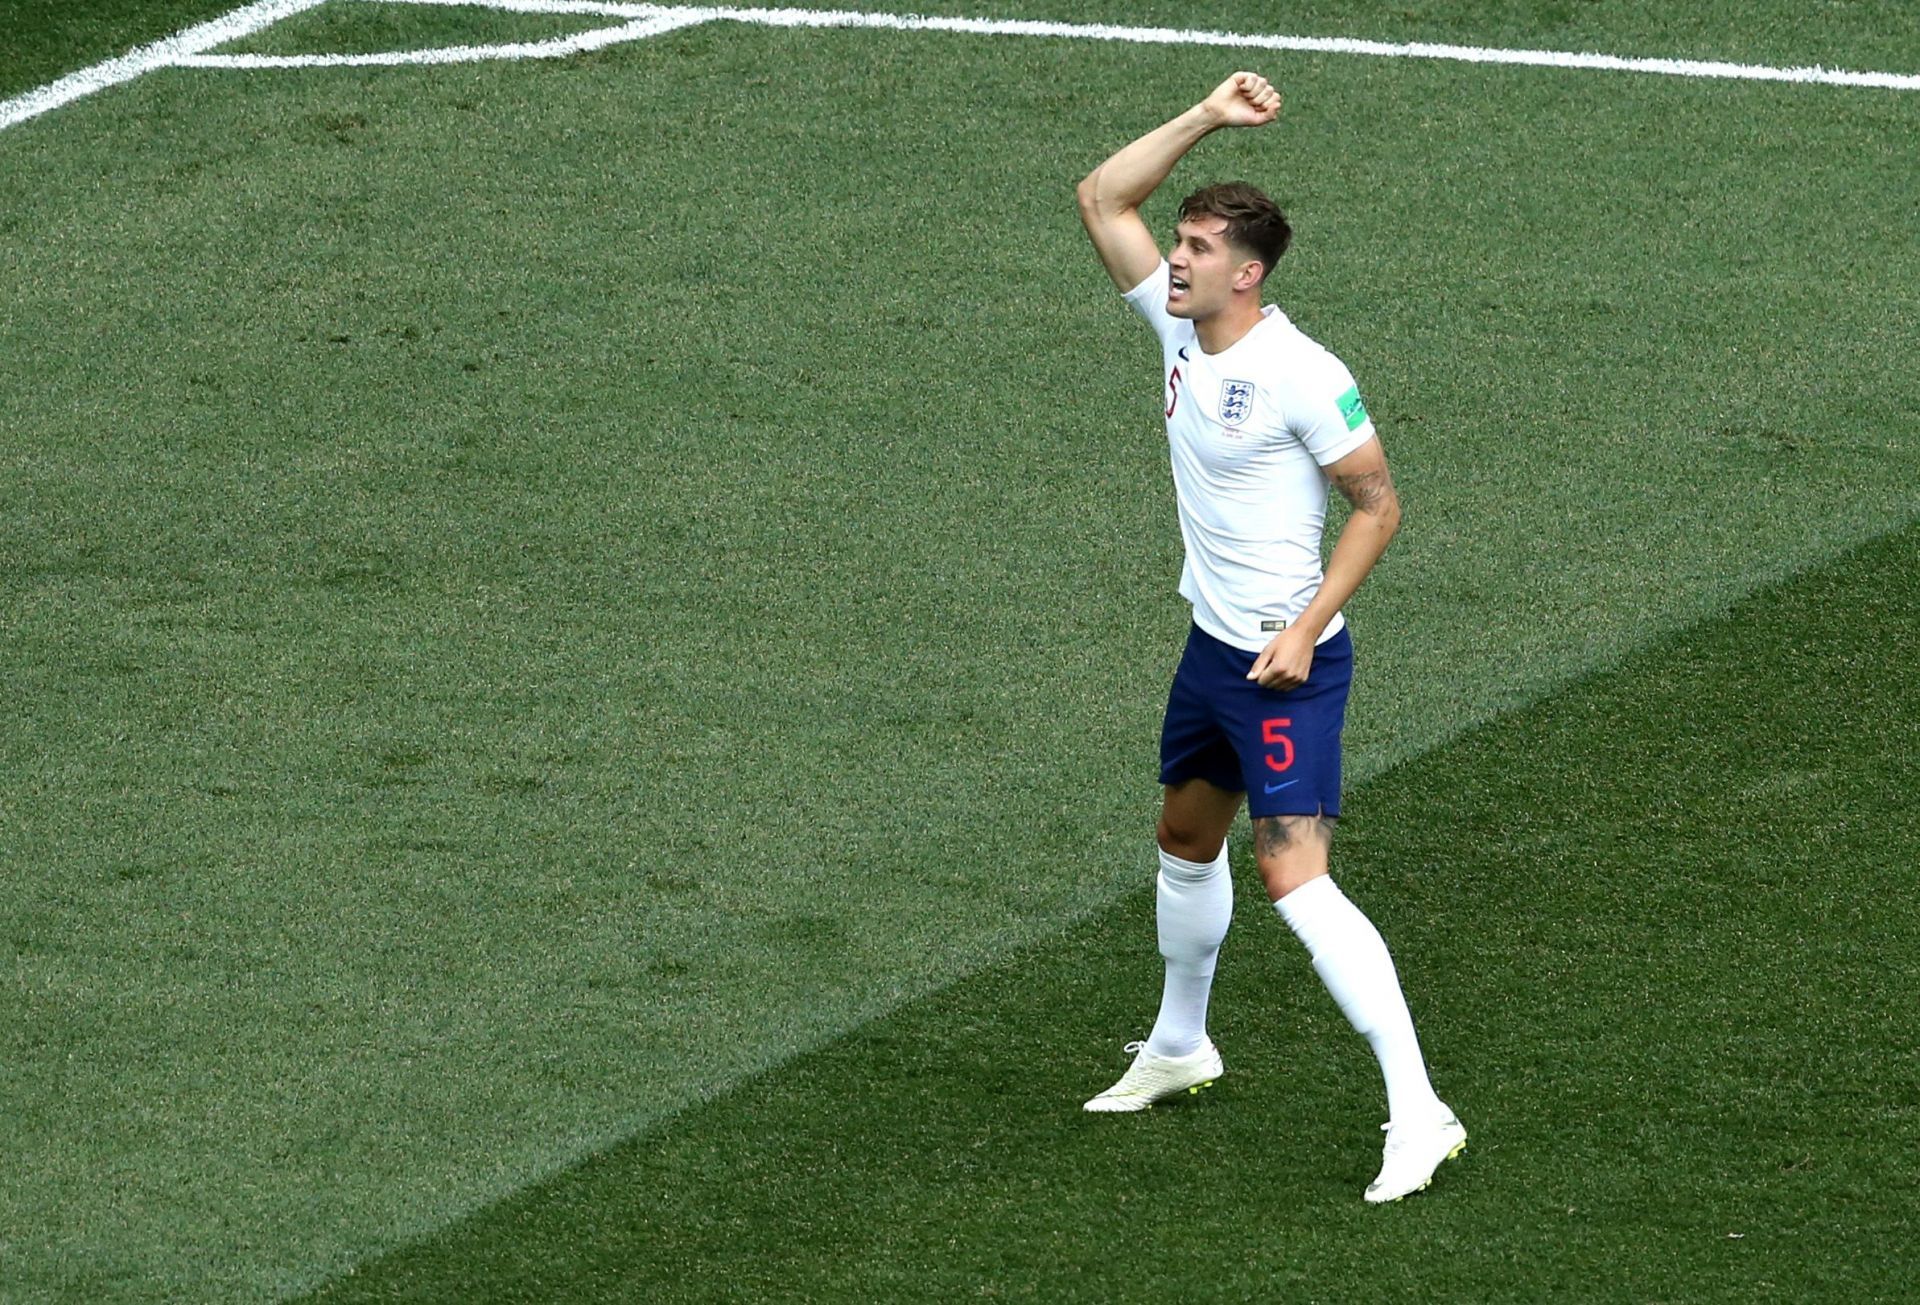 Stones in action at the 2018 FIFA World Cup